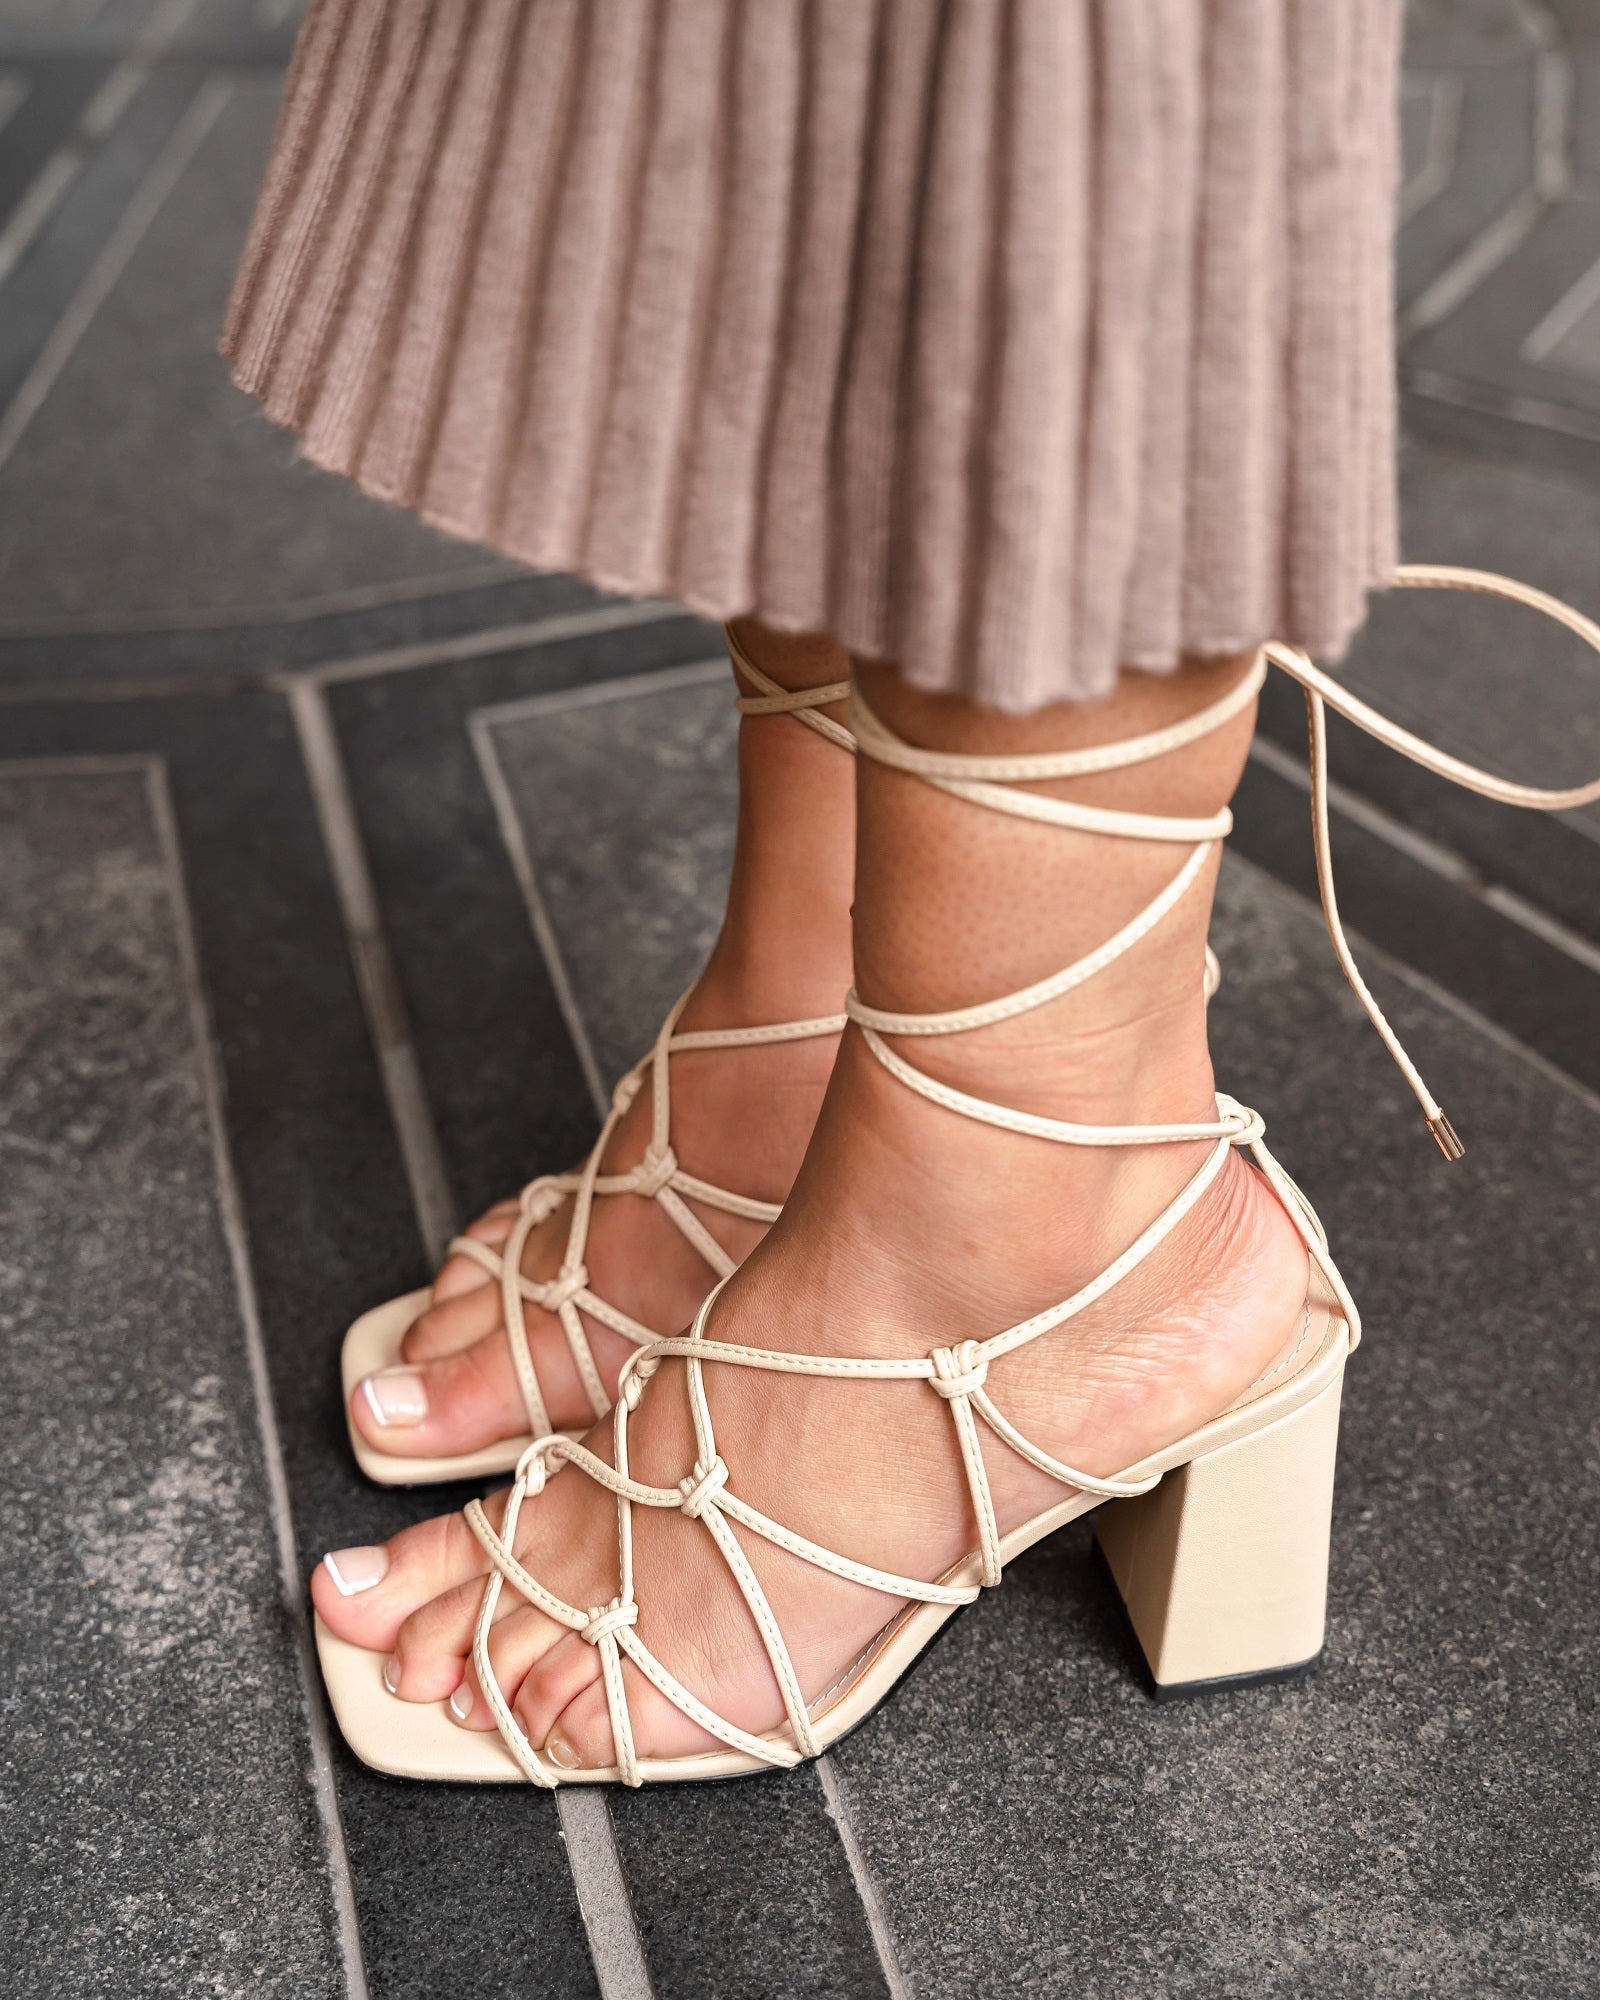 SAMPLE Eloise Strappy Sandal Nude by Sole Shoes NZ Eloise-SN